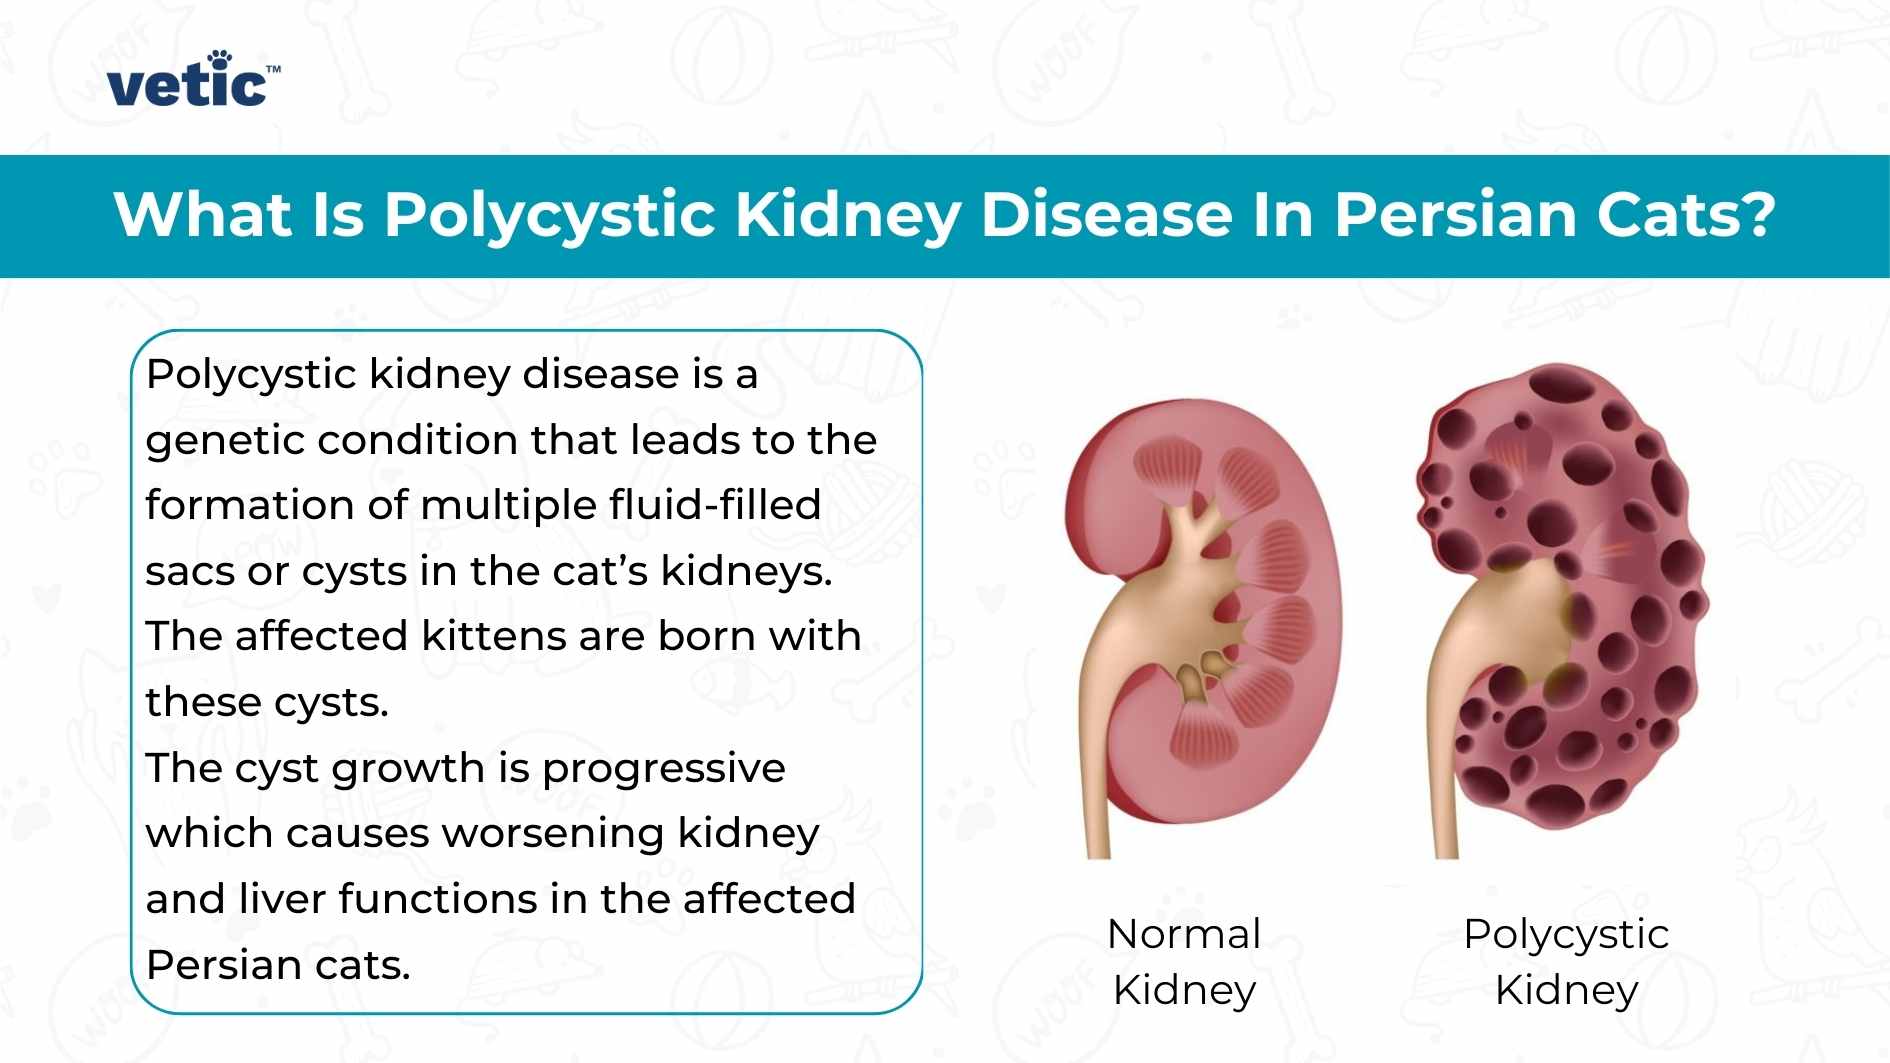 What Is Polycystic Kidney Disease In Persian Cats? Polycystic kidney disease is a genetic condition that leads to the formation of multiple fluid-filled sacs or cysts in the cat’s kidneys. The affected kittens are born with these cysts. The cyst growth is progressive which causes worsening kidney and liver functions in the affected Persian cats. Image by Vetic